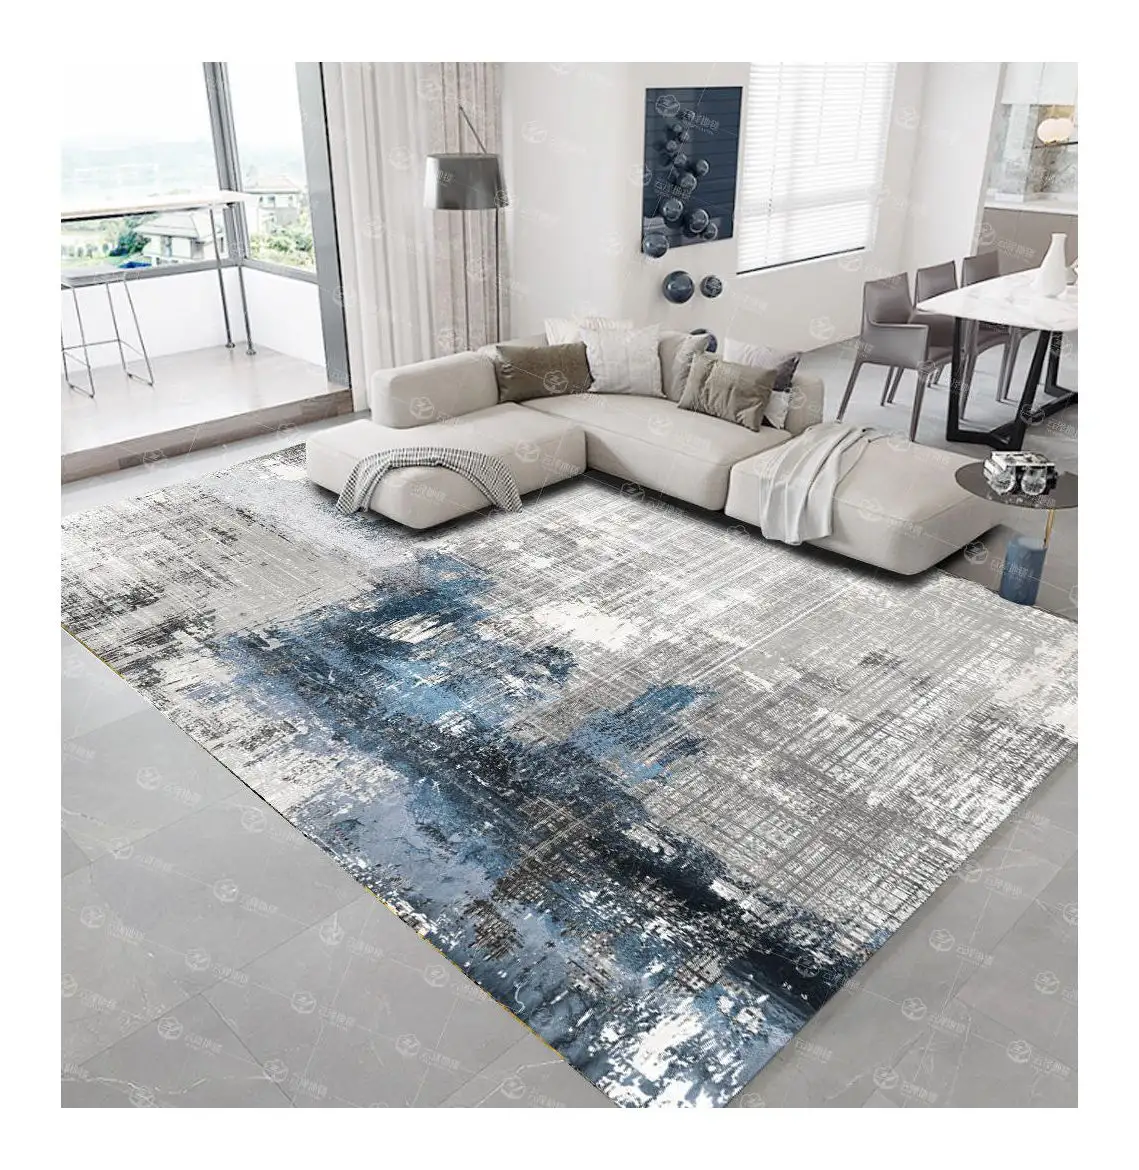 Luxury custom 3D square fashion floor carpet china high quality blue carpets and rugs for sale large area rugs